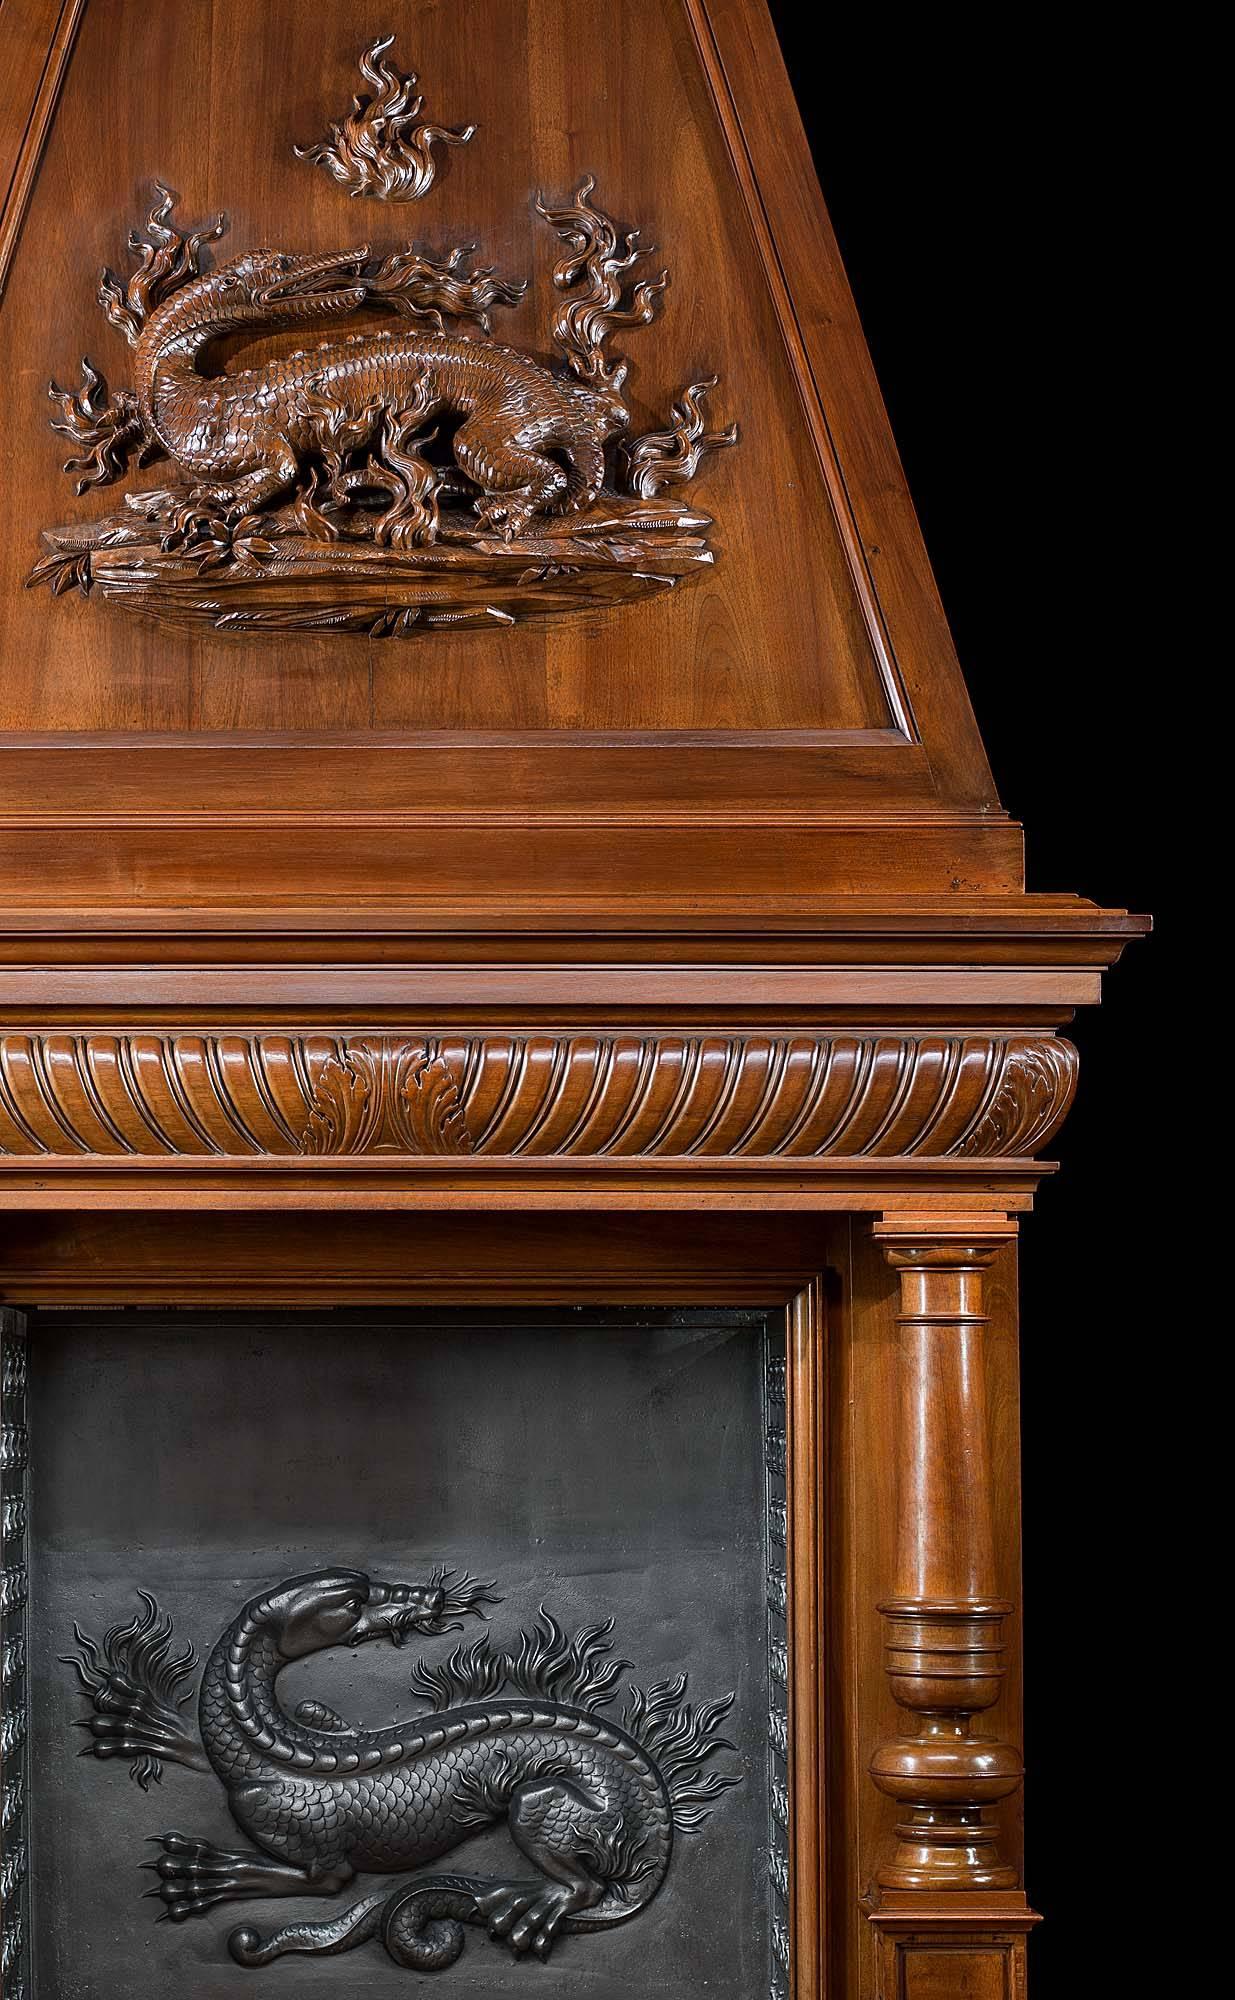 A very tall and imposing antique walnut trumeau chimneypiece deeply carved with a salamander surrounded by flames in high relief on the trumeau. The fireplace surround, with a rectangular opening and a wide gadrooned frieze centred by acanthus